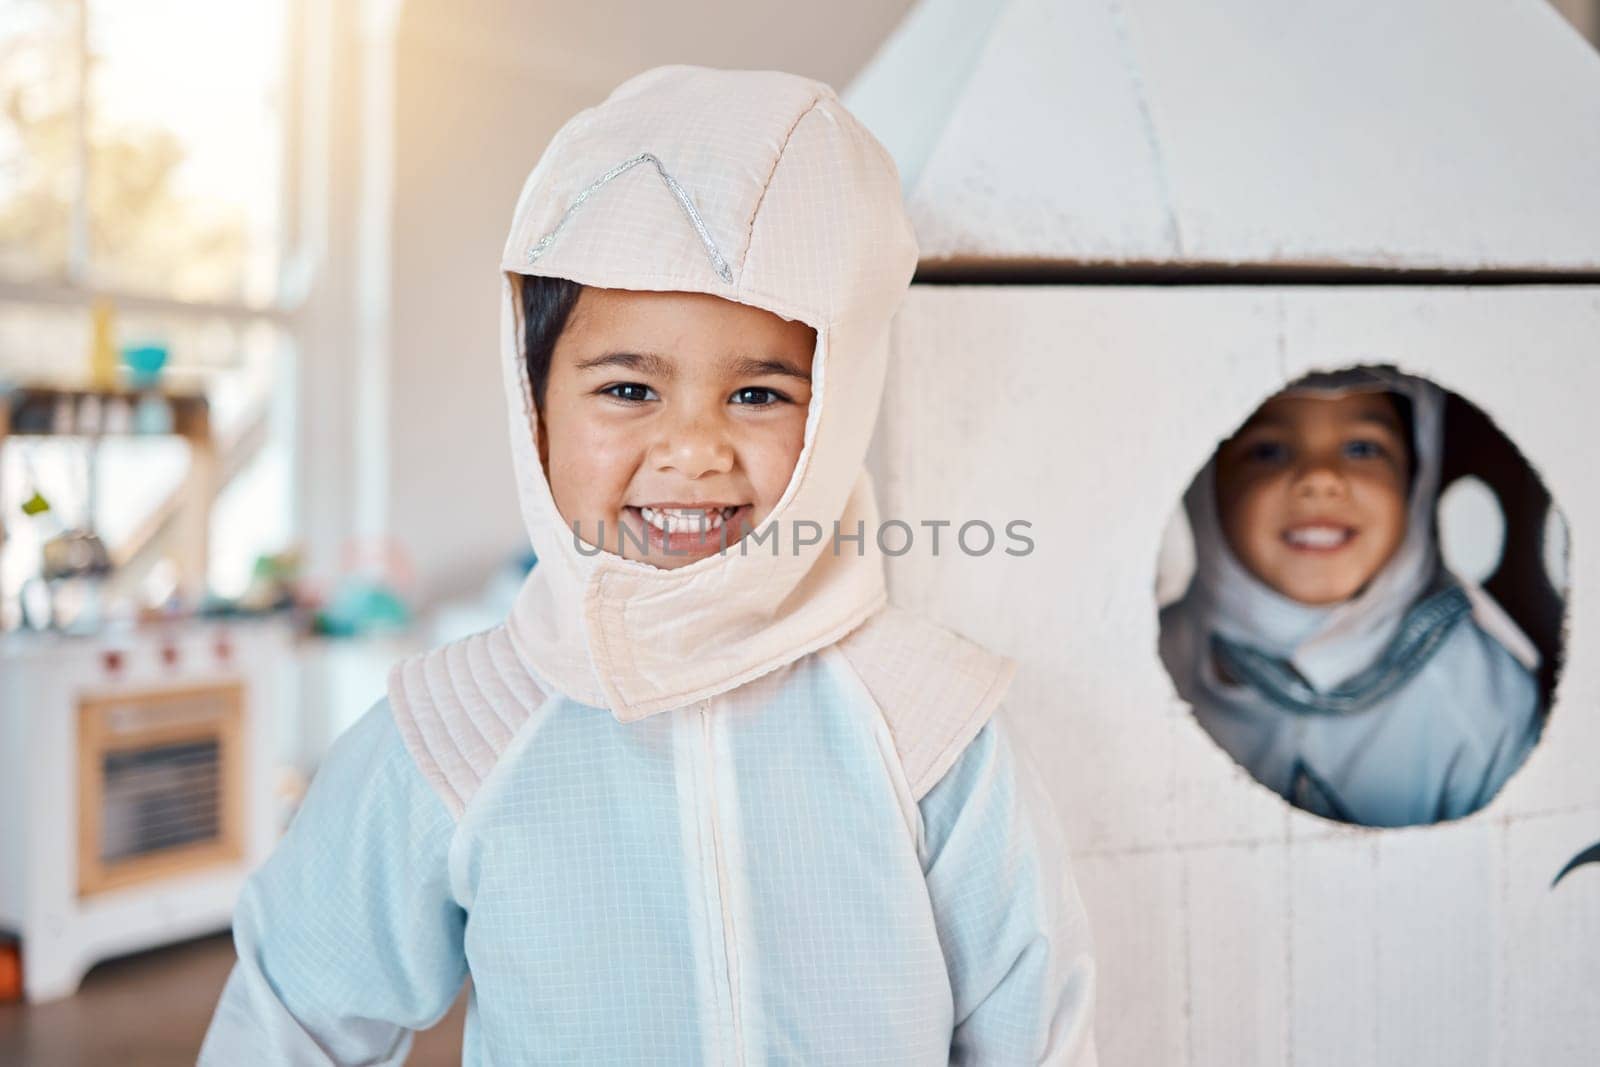 Astronaut portrait, spaceship and children happy, playing and role play space travel, home fantasy games or pretend rocket. Explore universe, Halloween costume and youth kids imagine galaxy adventure.